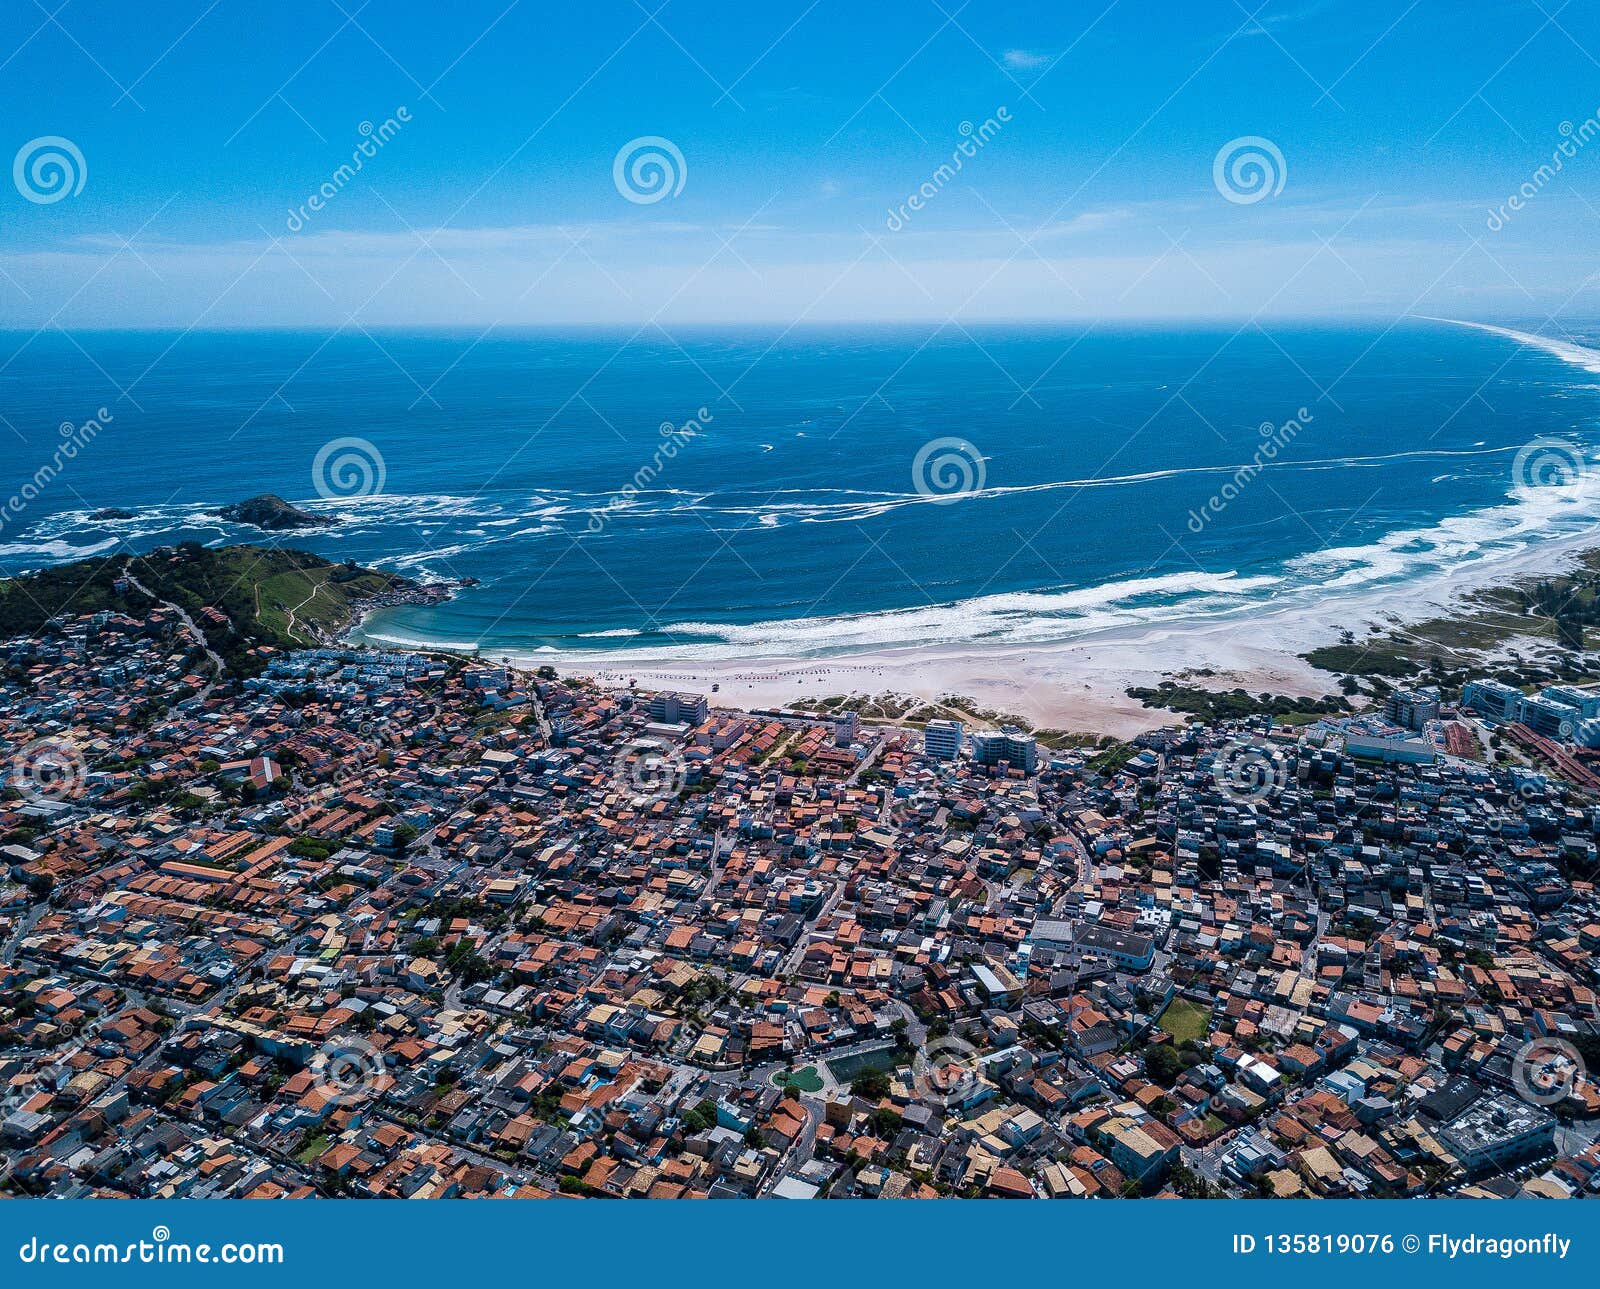 brazilian small beautiful city arraial do cabo . aerial drone photo from above city line. red roofs, narrow streets